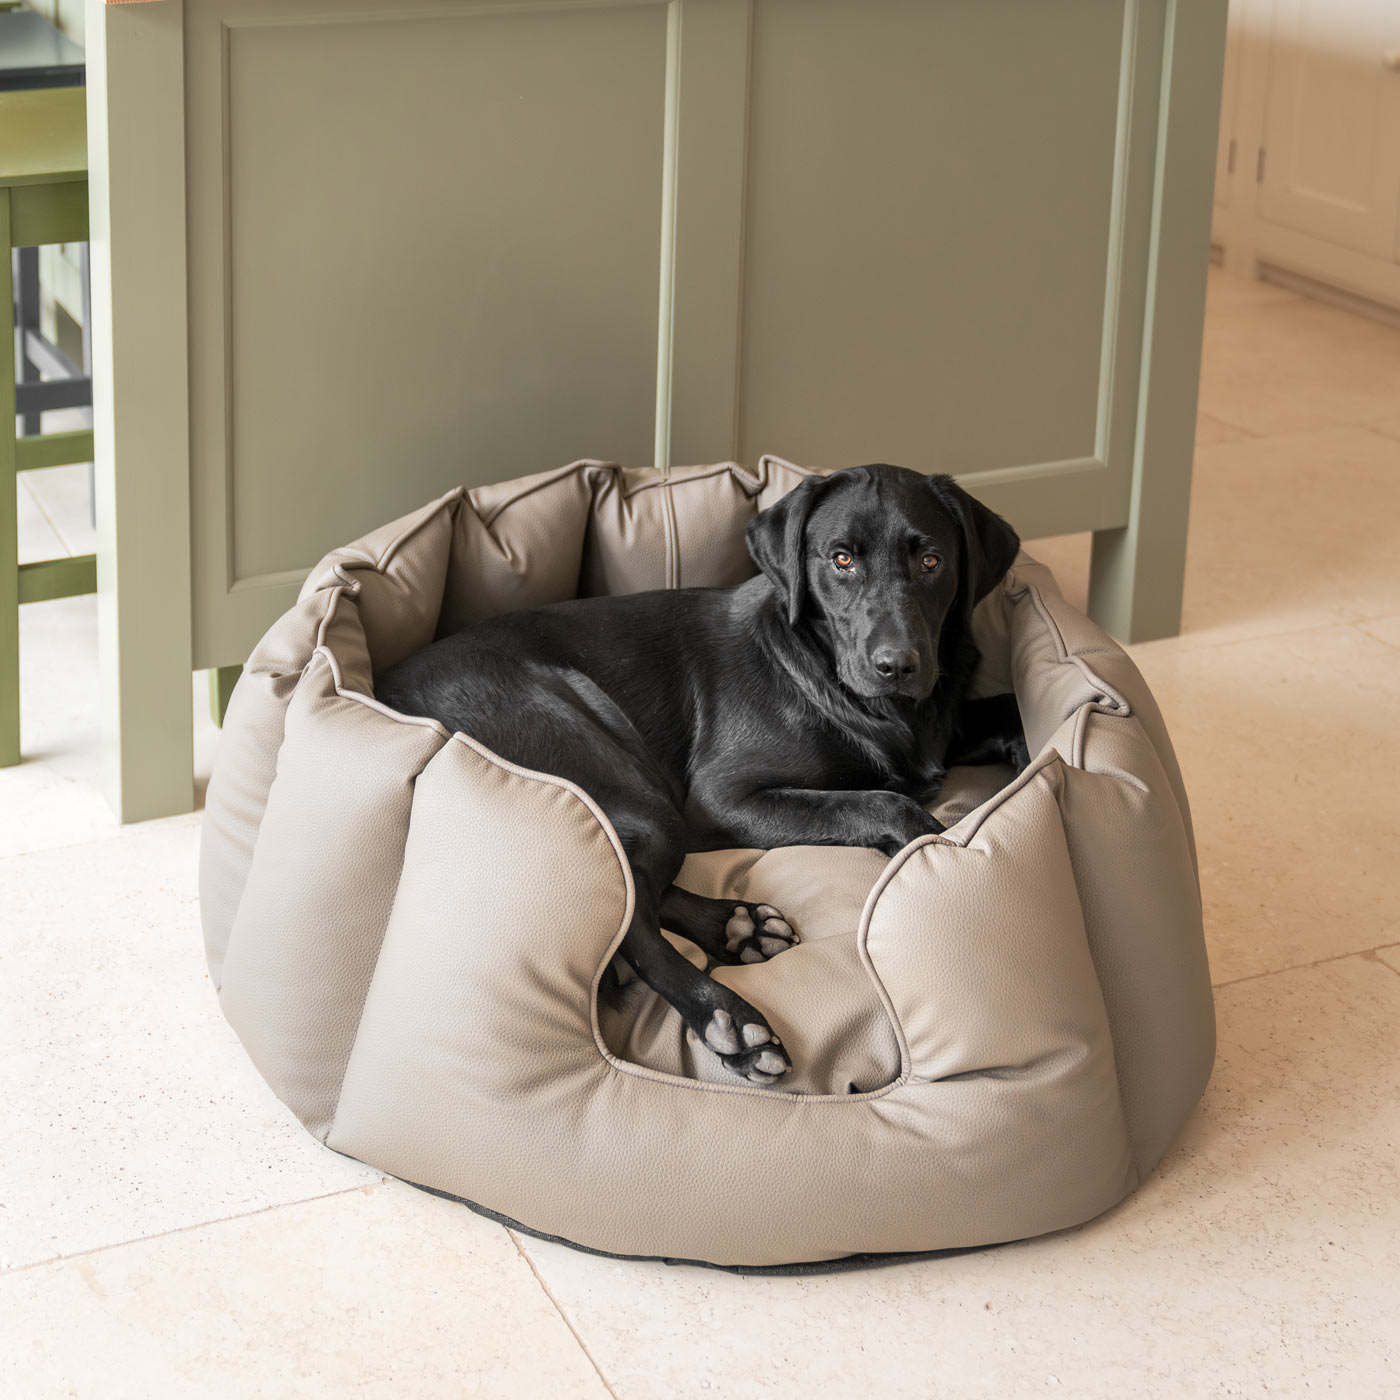 Luxury Handmade High Wall in Rhino Tough Desert Faux Leather, in Camel, Perfect For Your Pets Nap Time! Available To Personalize at Lords & Labradors US